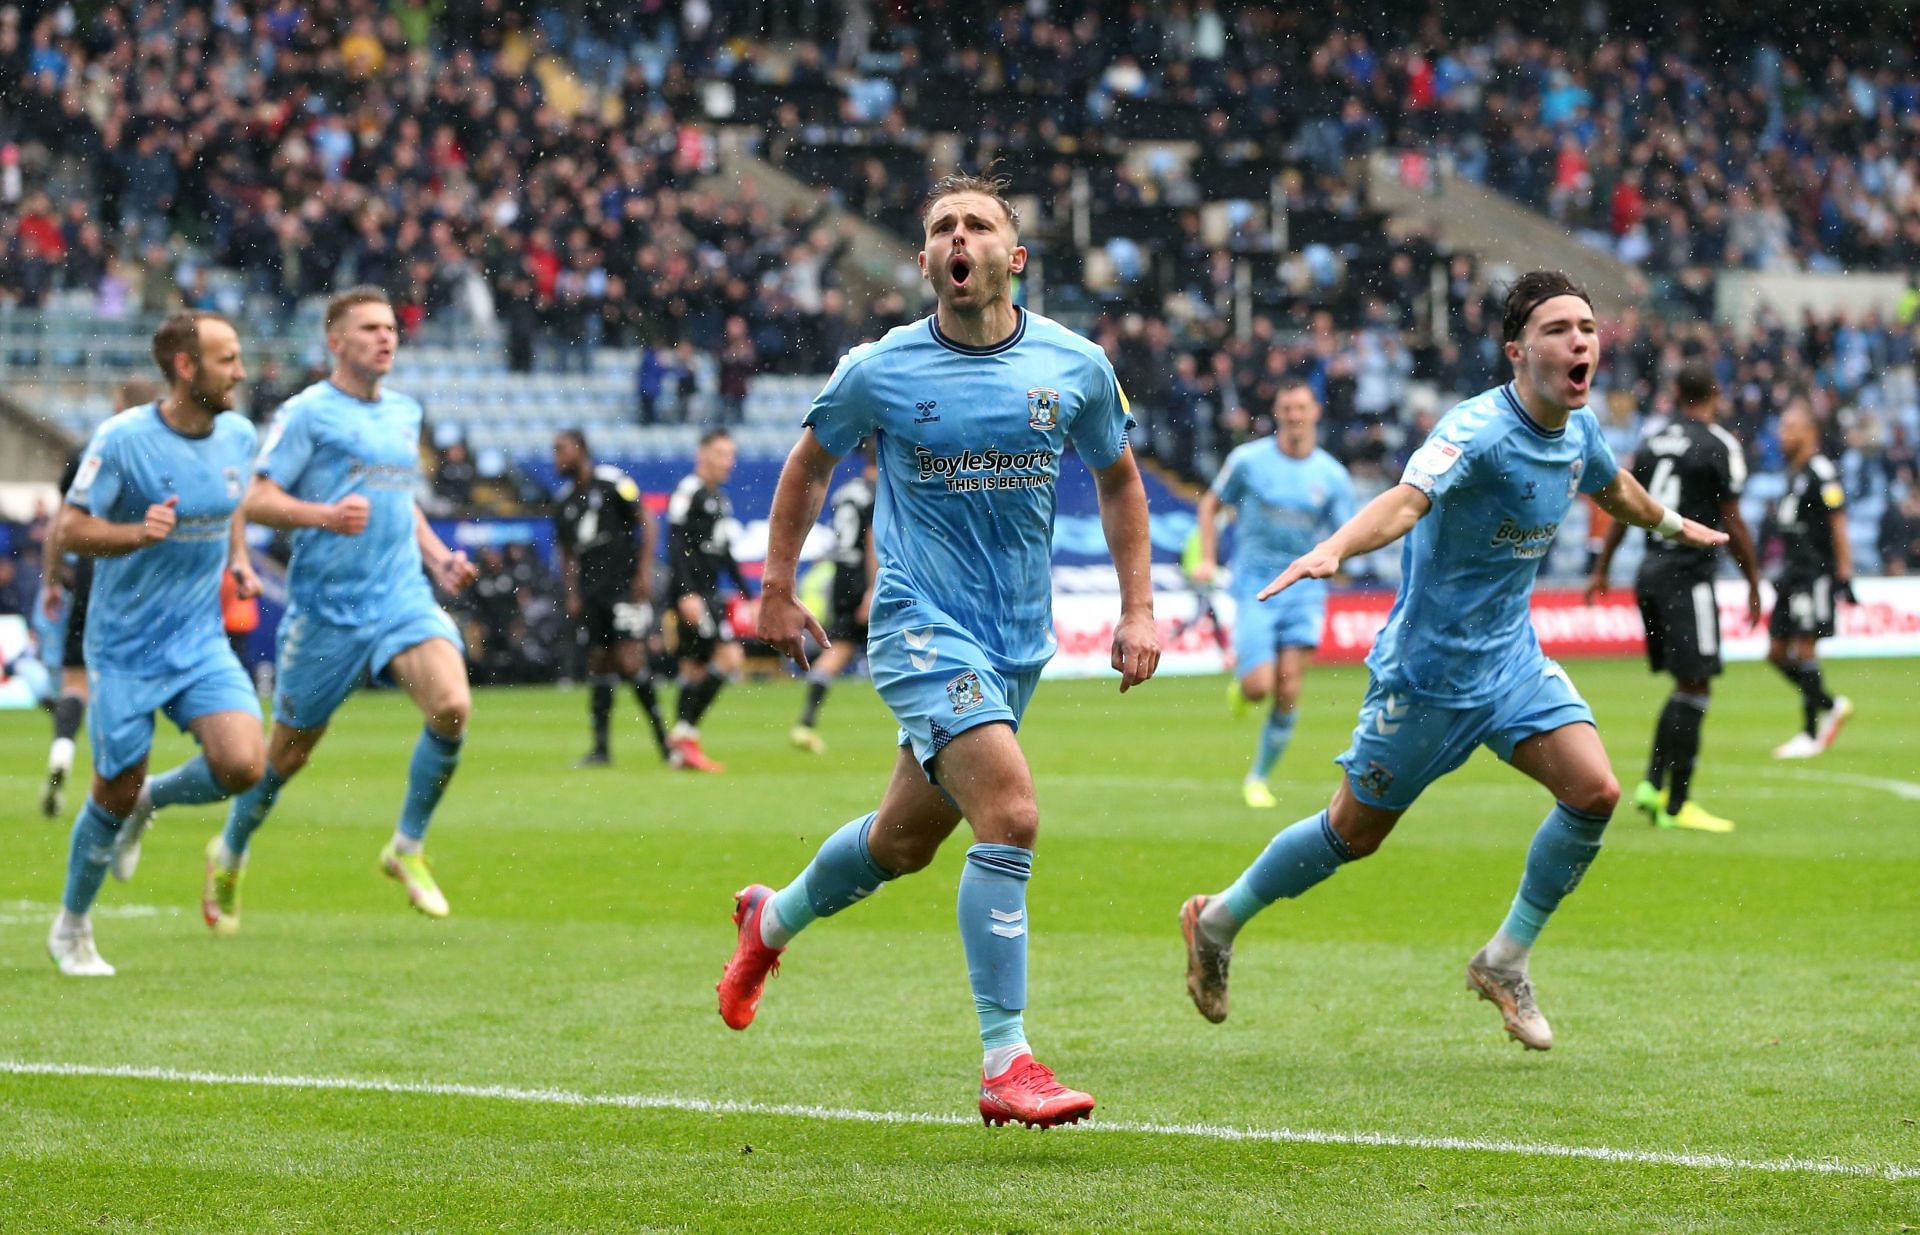 Coventry City will be looking to bounce back with an EFL Championship win on Saturday